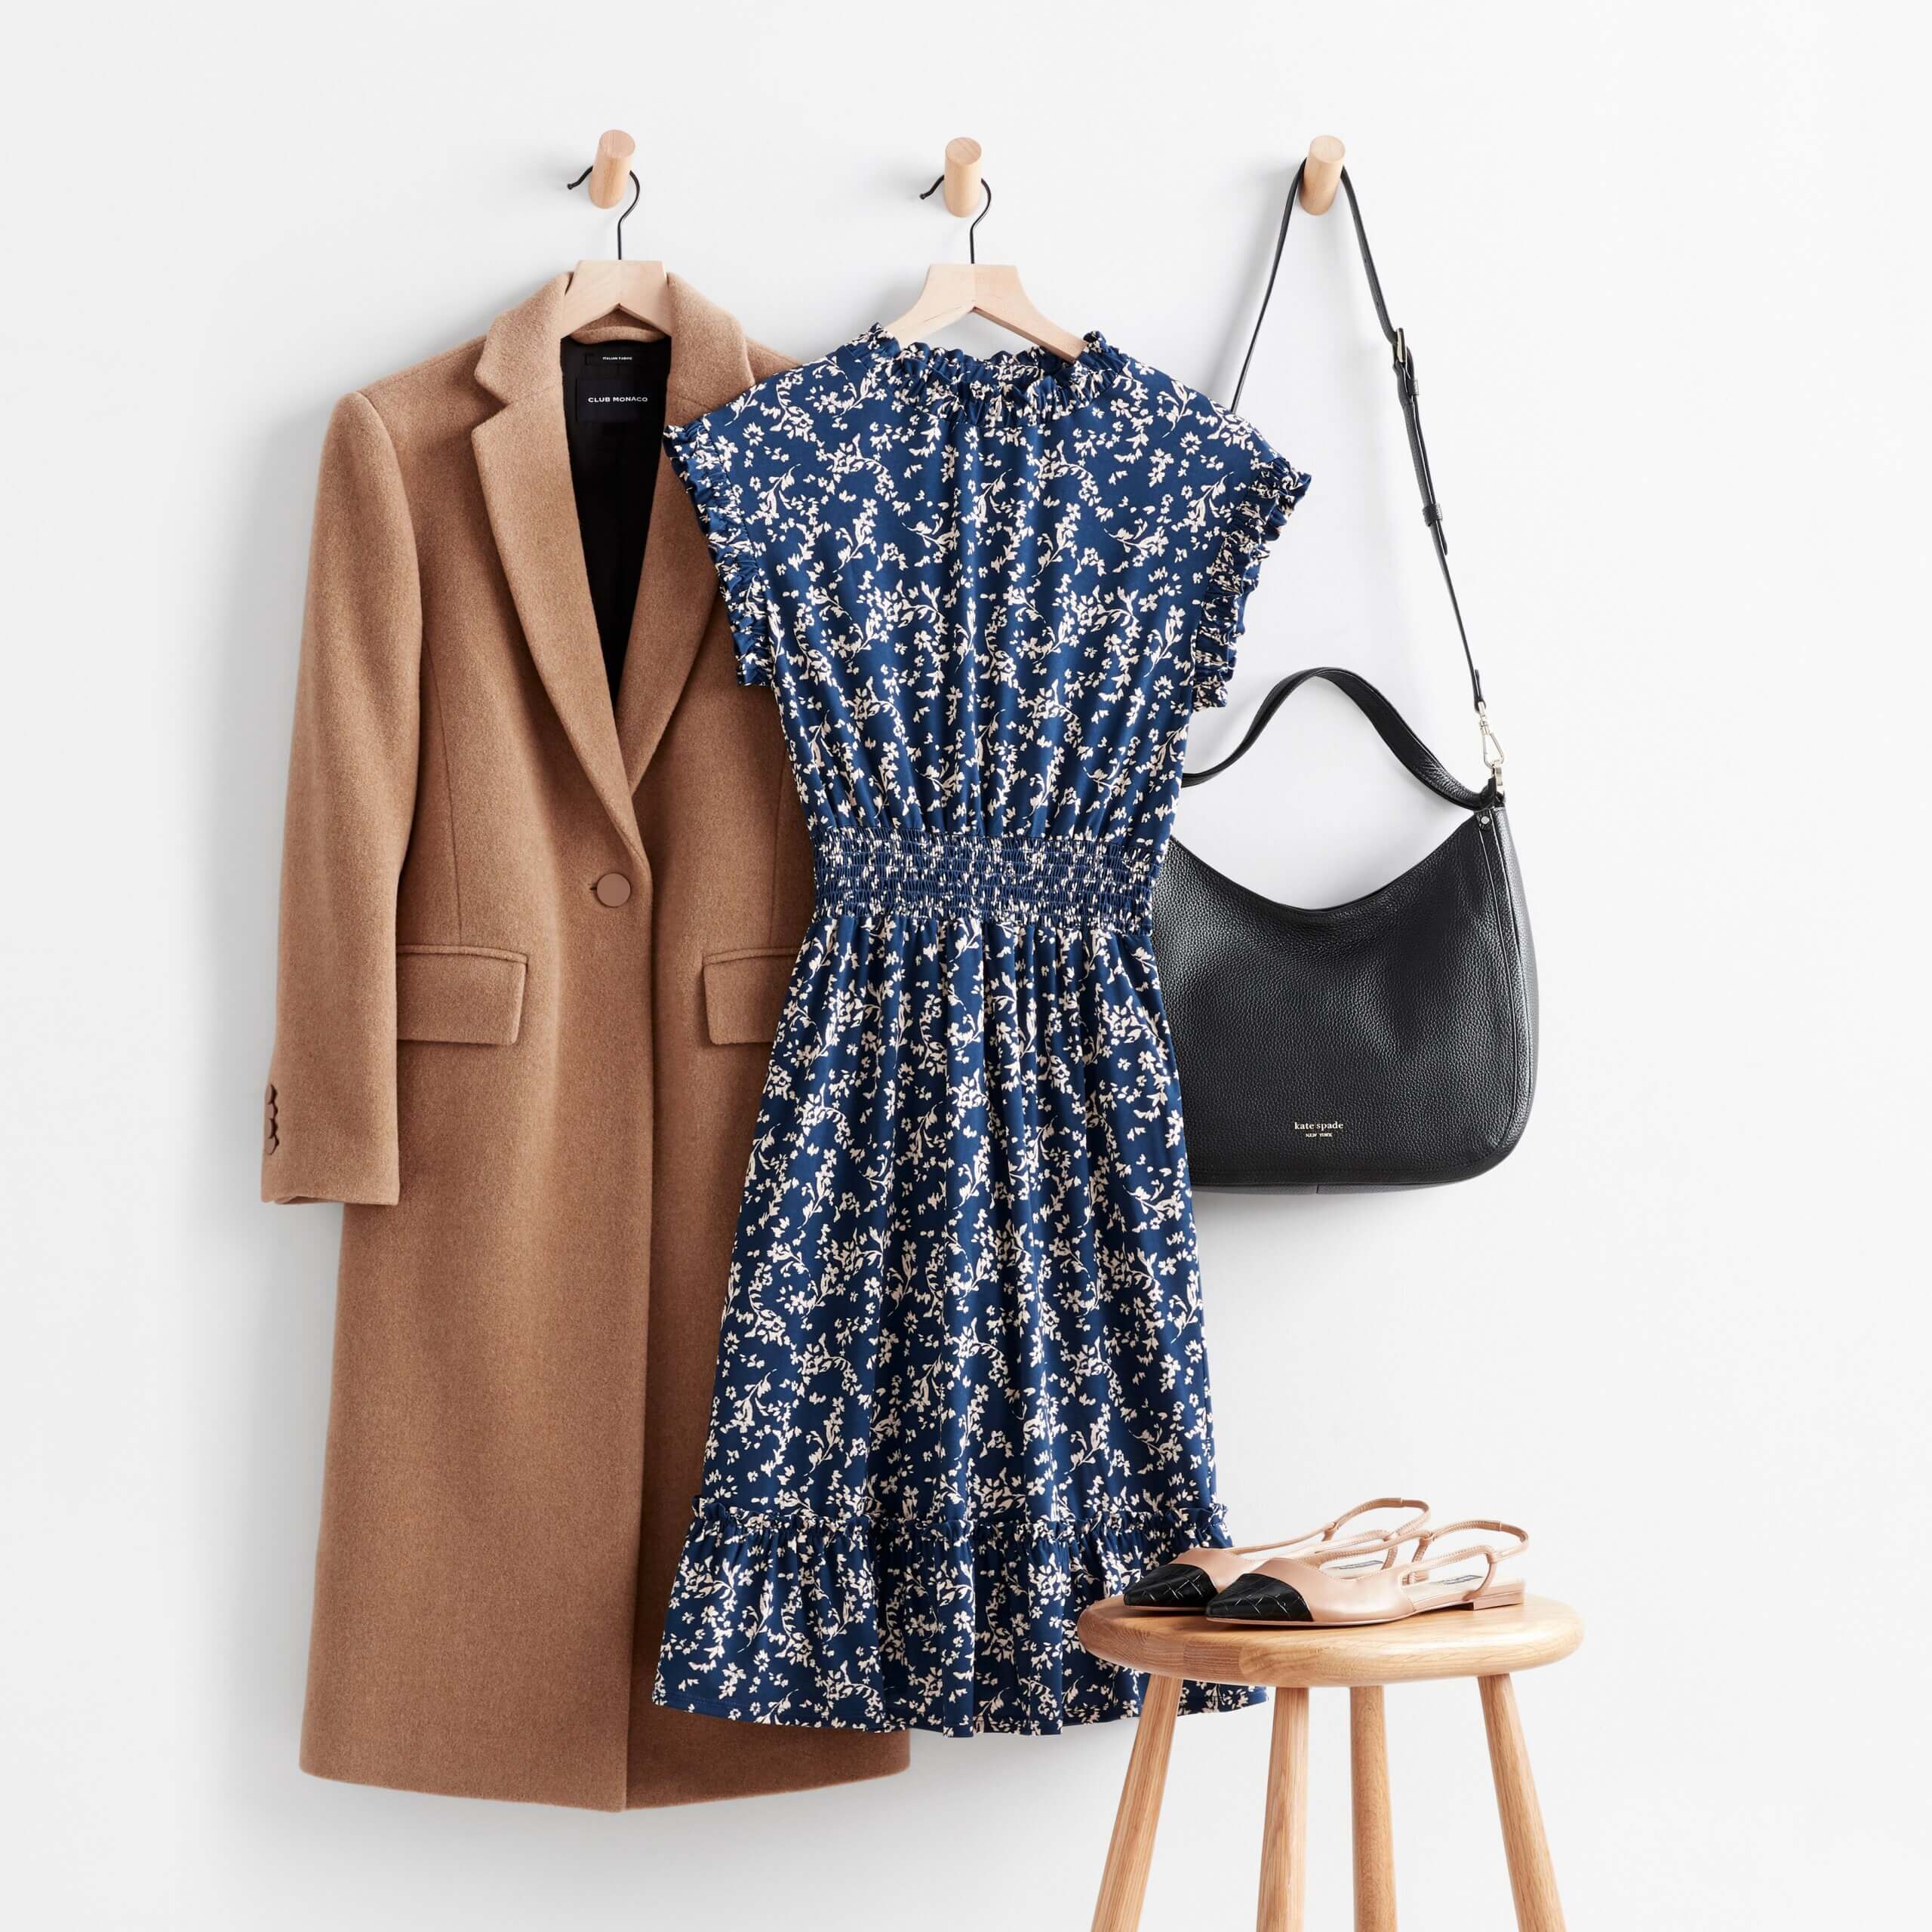 Wear Dresses in the Winter: How to Make Dresses Warmer